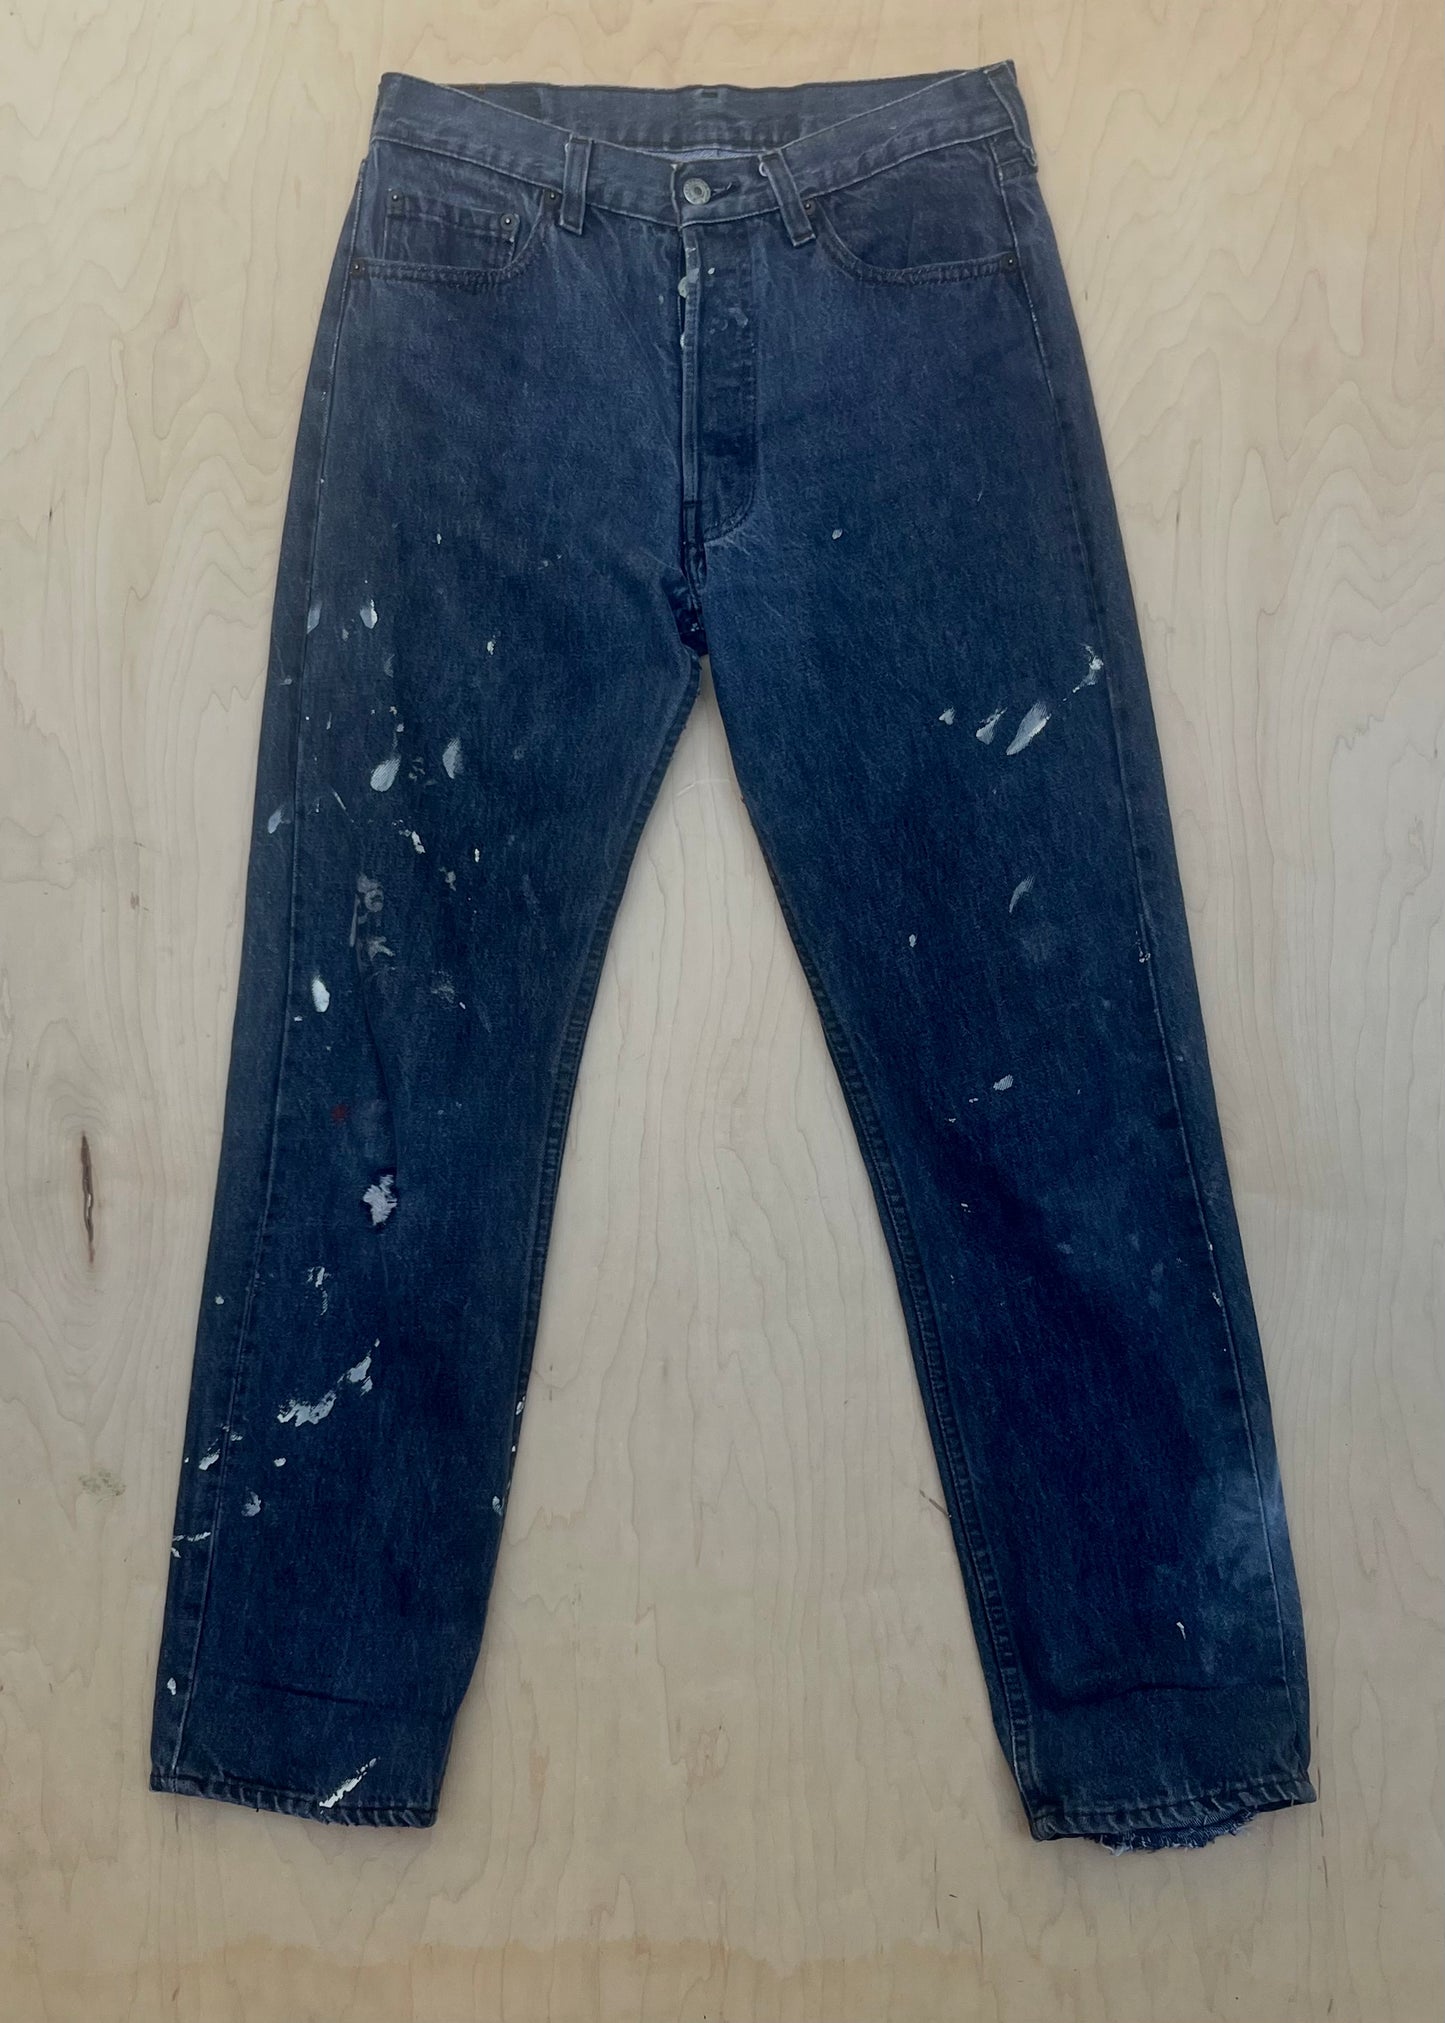 BLACK LEVIS 501S WITH PAINTER STAINS